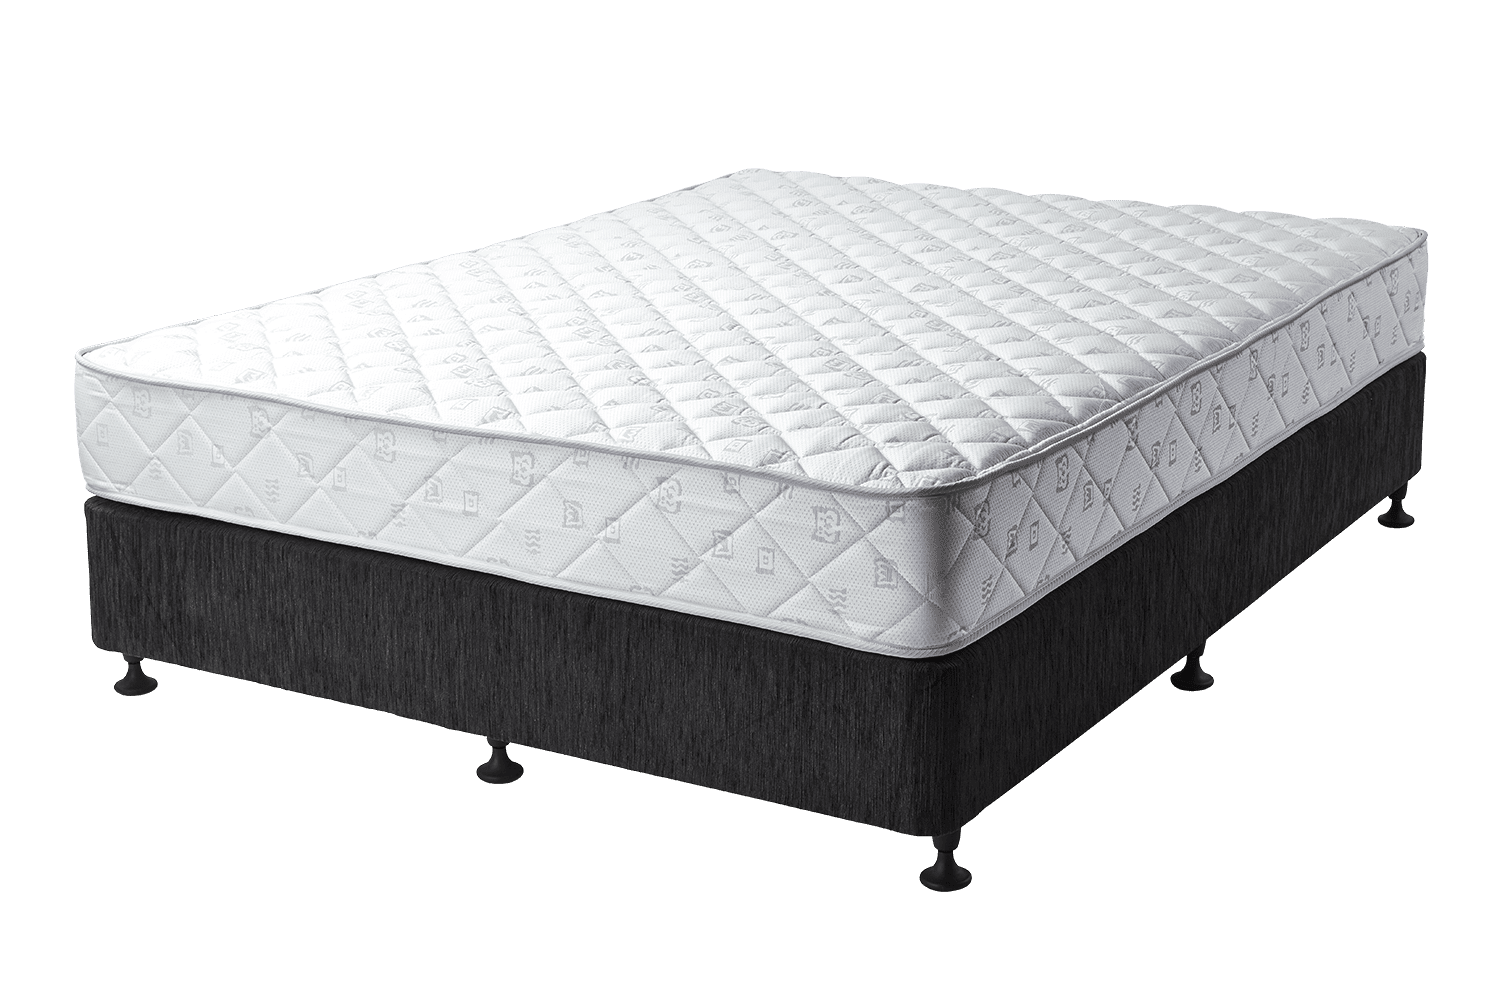 mattresses for sale dundee